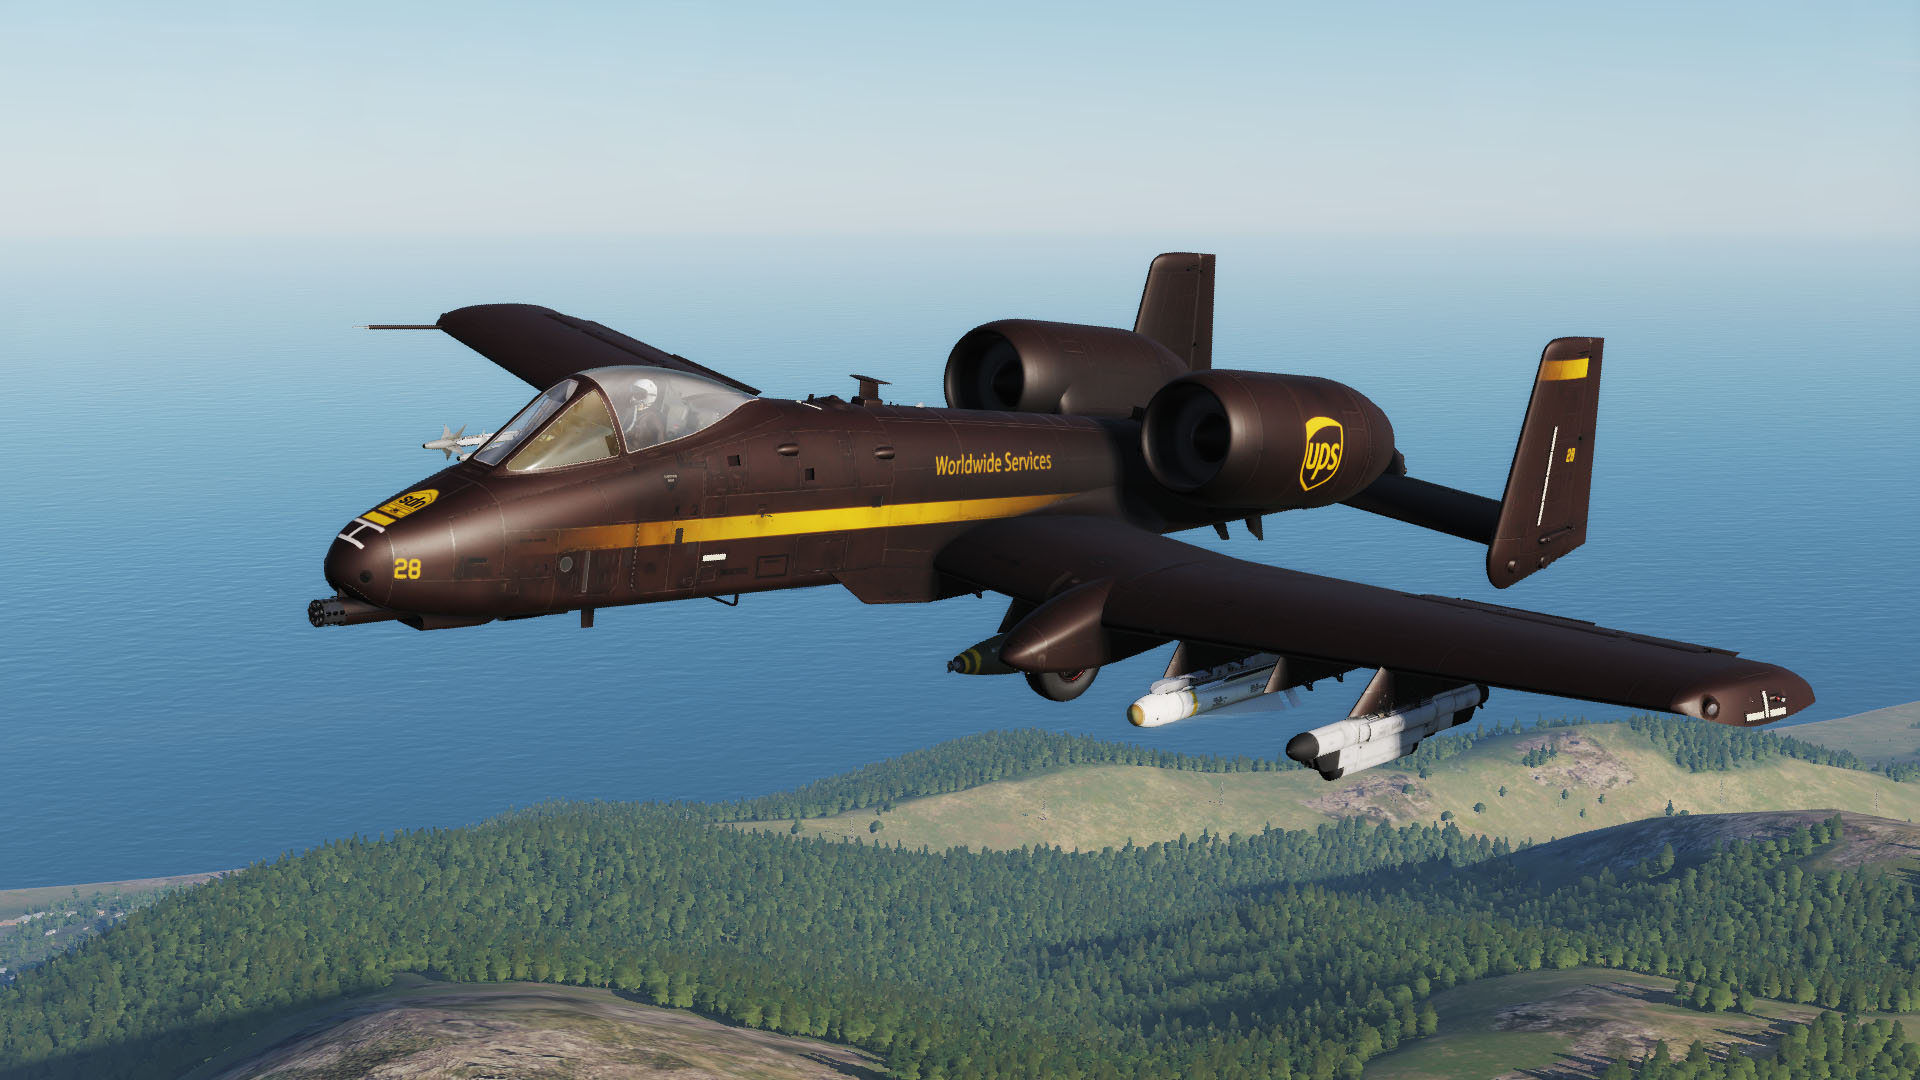 Fictional UPS skin for A-10C